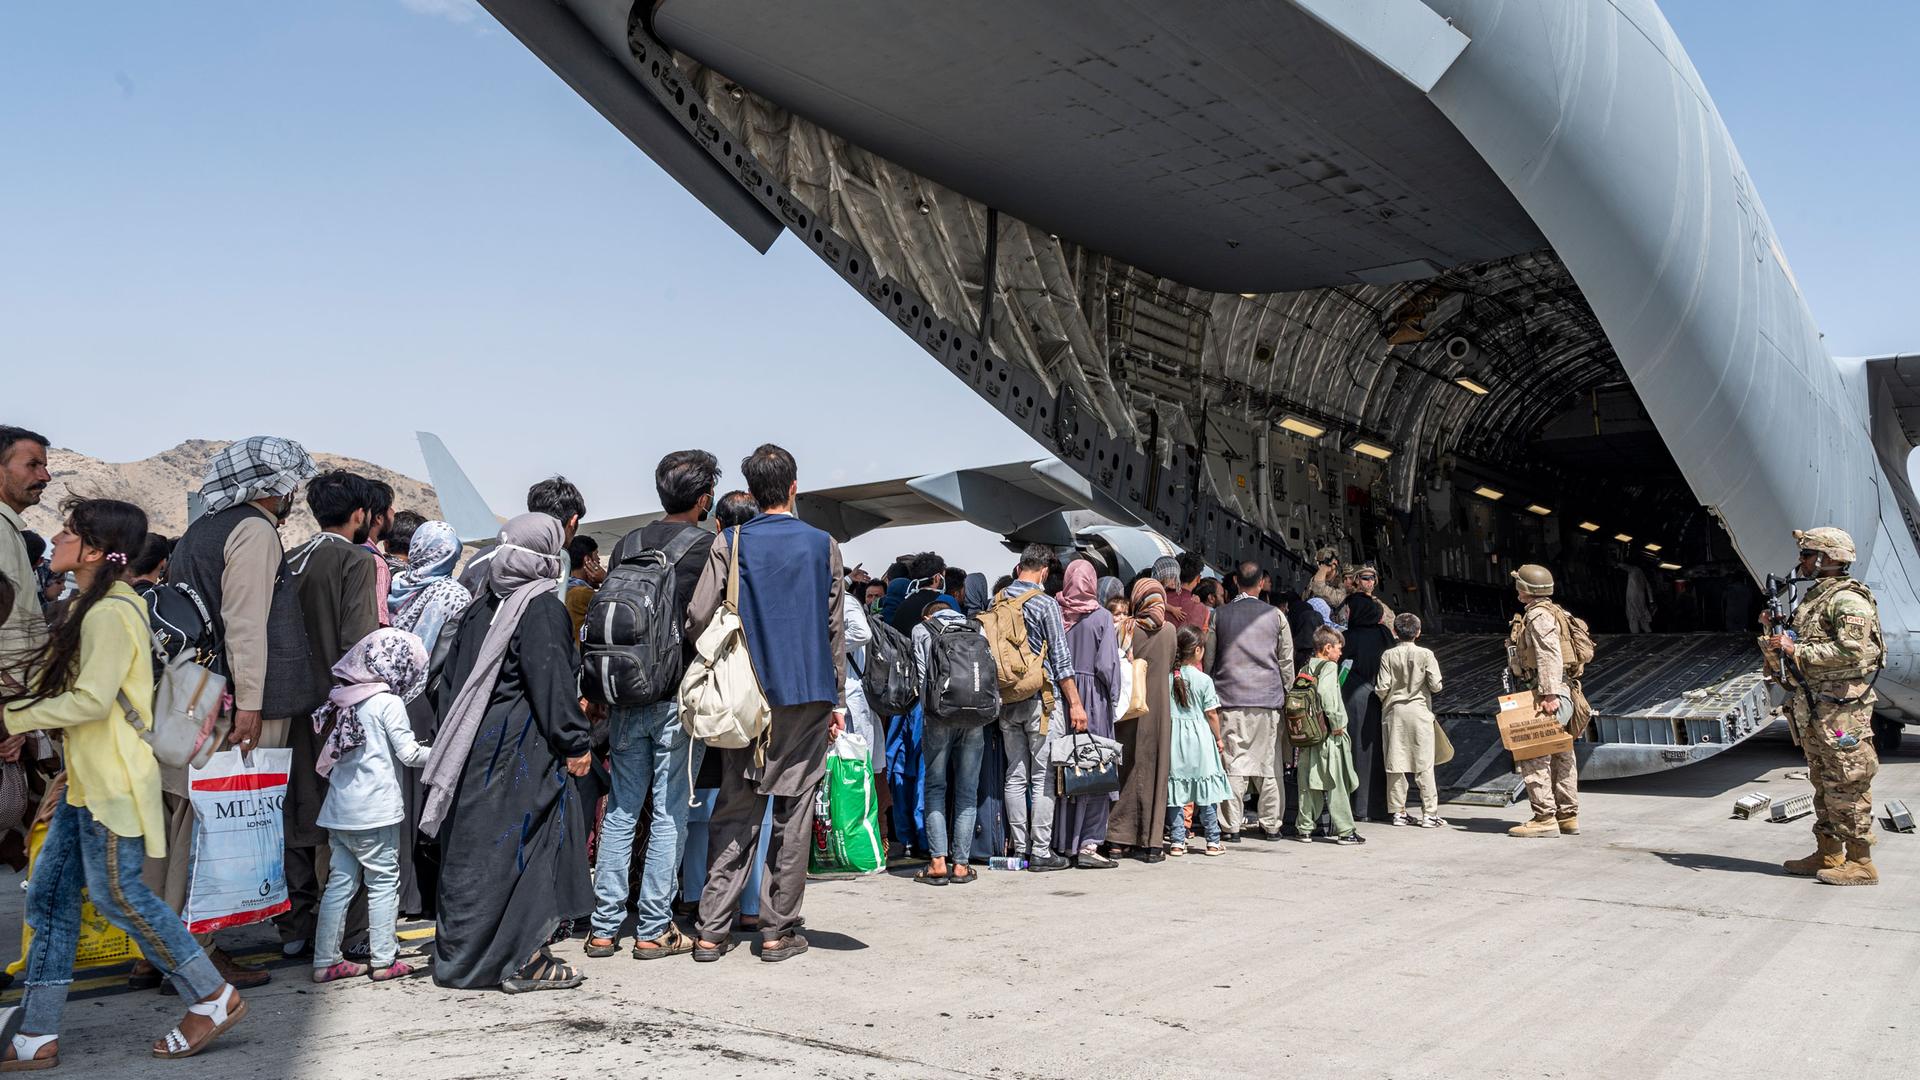 In this Aug. 21, 2021, image provided by the U.S. Air Force, US Airmen and U.S. Marines guide evacuees aboard a U.S. Air Force C-17 Globemaster III in support of the Afghanistan evacuation at Hamid Karzai International Airport in Kabul, Afghanistan. 